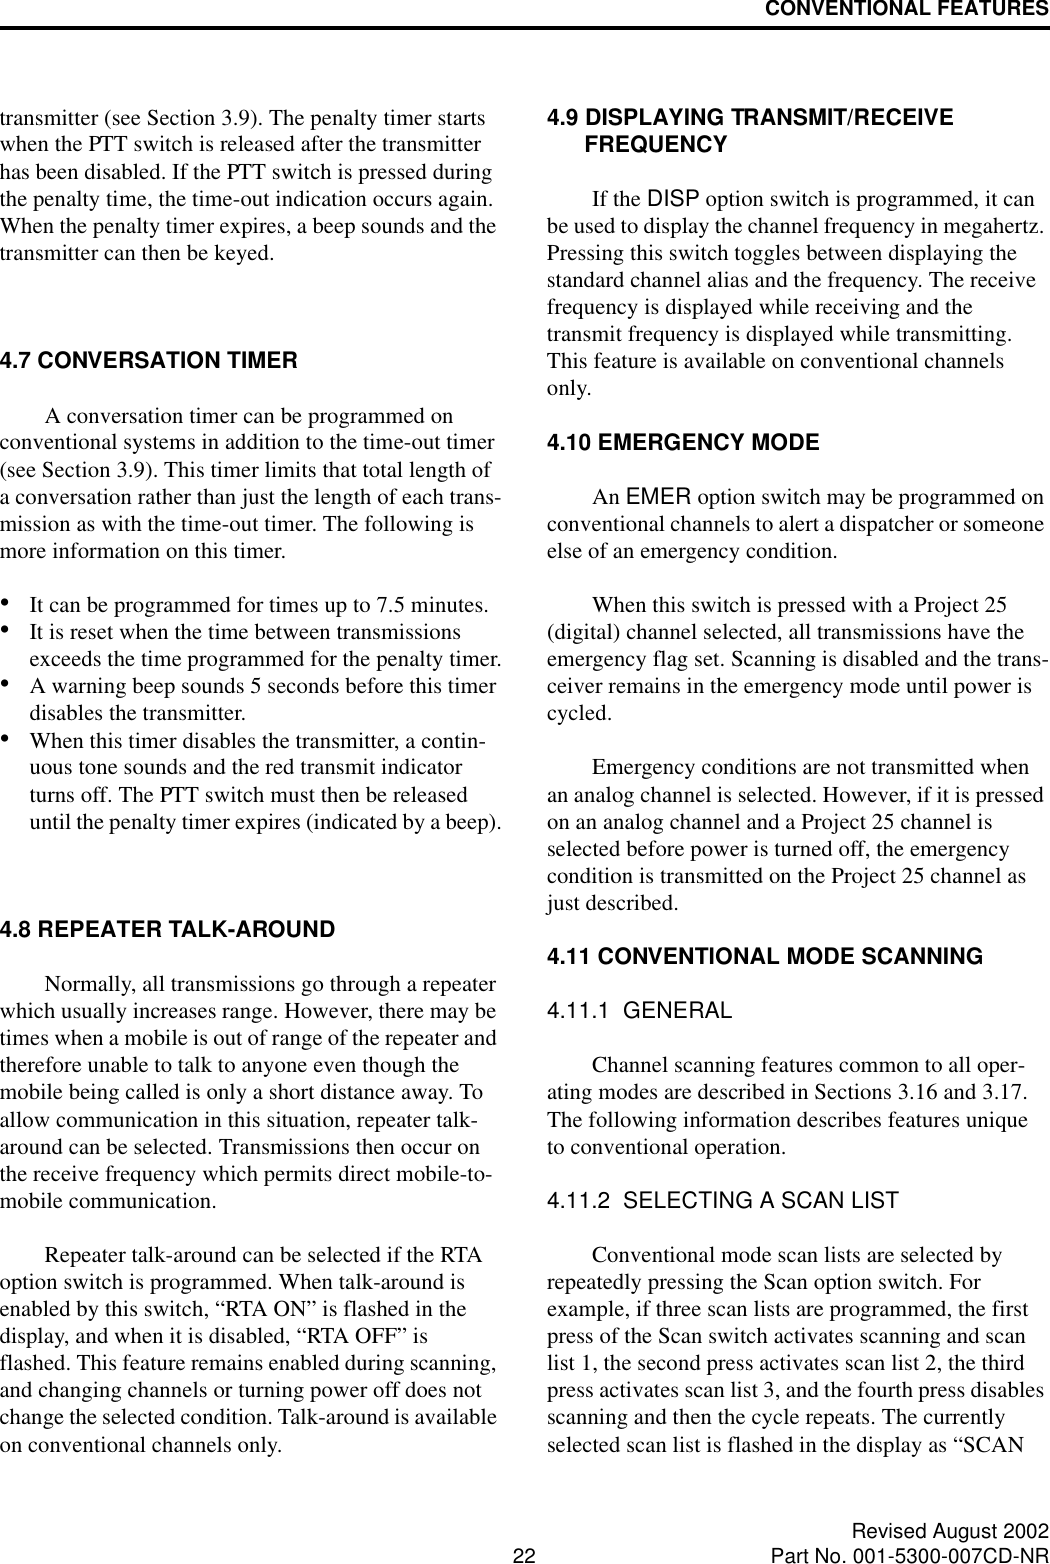 CONVENTIONAL FEATURES22 Revised August 2002Part No. 001-5300-007CD-NRtransmitter (see Section 3.9). The penalty timer starts when the PTT switch is released after the transmitter has been disabled. If the PTT switch is pressed during the penalty time, the time-out indication occurs again. When the penalty timer expires, a beep sounds and the transmitter can then be keyed.4.7 CONVERSATION TIMERA conversation timer can be programmed on conventional systems in addition to the time-out timer (see Section 3.9). This timer limits that total length of a conversation rather than just the length of each trans-mission as with the time-out timer. The following is more information on this timer.•It can be programmed for times up to 7.5 minutes.•It is reset when the time between transmissions exceeds the time programmed for the penalty timer.•A warning beep sounds 5 seconds before this timer disables the transmitter.•When this timer disables the transmitter, a contin-uous tone sounds and the red transmit indicator turns off. The PTT switch must then be released until the penalty timer expires (indicated by a beep).4.8 REPEATER TALK-AROUNDNormally, all transmissions go through a repeater which usually increases range. However, there may be times when a mobile is out of range of the repeater and therefore unable to talk to anyone even though the mobile being called is only a short distance away. To allow communication in this situation, repeater talk-around can be selected. Transmissions then occur on the receive frequency which permits direct mobile-to-mobile communication.Repeater talk-around can be selected if the RTA option switch is programmed. When talk-around is enabled by this switch, “RTA ON” is flashed in the display, and when it is disabled, “RTA OFF” is flashed. This feature remains enabled during scanning, and changing channels or turning power off does not change the selected condition. Talk-around is available on conventional channels only.4.9 DISPLAYING TRANSMIT/RECEIVE FREQUENCYIf the DISP option switch is programmed, it can be used to display the channel frequency in megahertz. Pressing this switch toggles between displaying the standard channel alias and the frequency. The receive frequency is displayed while receiving and the transmit frequency is displayed while transmitting. This feature is available on conventional channels only.4.10 EMERGENCY MODEAn EMER option switch may be programmed on conventional channels to alert a dispatcher or someone else of an emergency condition. When this switch is pressed with a Project 25 (digital) channel selected, all transmissions have the emergency flag set. Scanning is disabled and the trans-ceiver remains in the emergency mode until power is cycled.Emergency conditions are not transmitted when an analog channel is selected. However, if it is pressed on an analog channel and a Project 25 channel is selected before power is turned off, the emergency condition is transmitted on the Project 25 channel as just described. 4.11 CONVENTIONAL MODE SCANNING4.11.1  GENERALChannel scanning features common to all oper-ating modes are described in Sections 3.16 and 3.17. The following information describes features unique to conventional operation.4.11.2  SELECTING A SCAN LISTConventional mode scan lists are selected by repeatedly pressing the Scan option switch. For example, if three scan lists are programmed, the first press of the Scan switch activates scanning and scan list 1, the second press activates scan list 2, the third press activates scan list 3, and the fourth press disables scanning and then the cycle repeats. The currently selected scan list is flashed in the display as “SCAN 